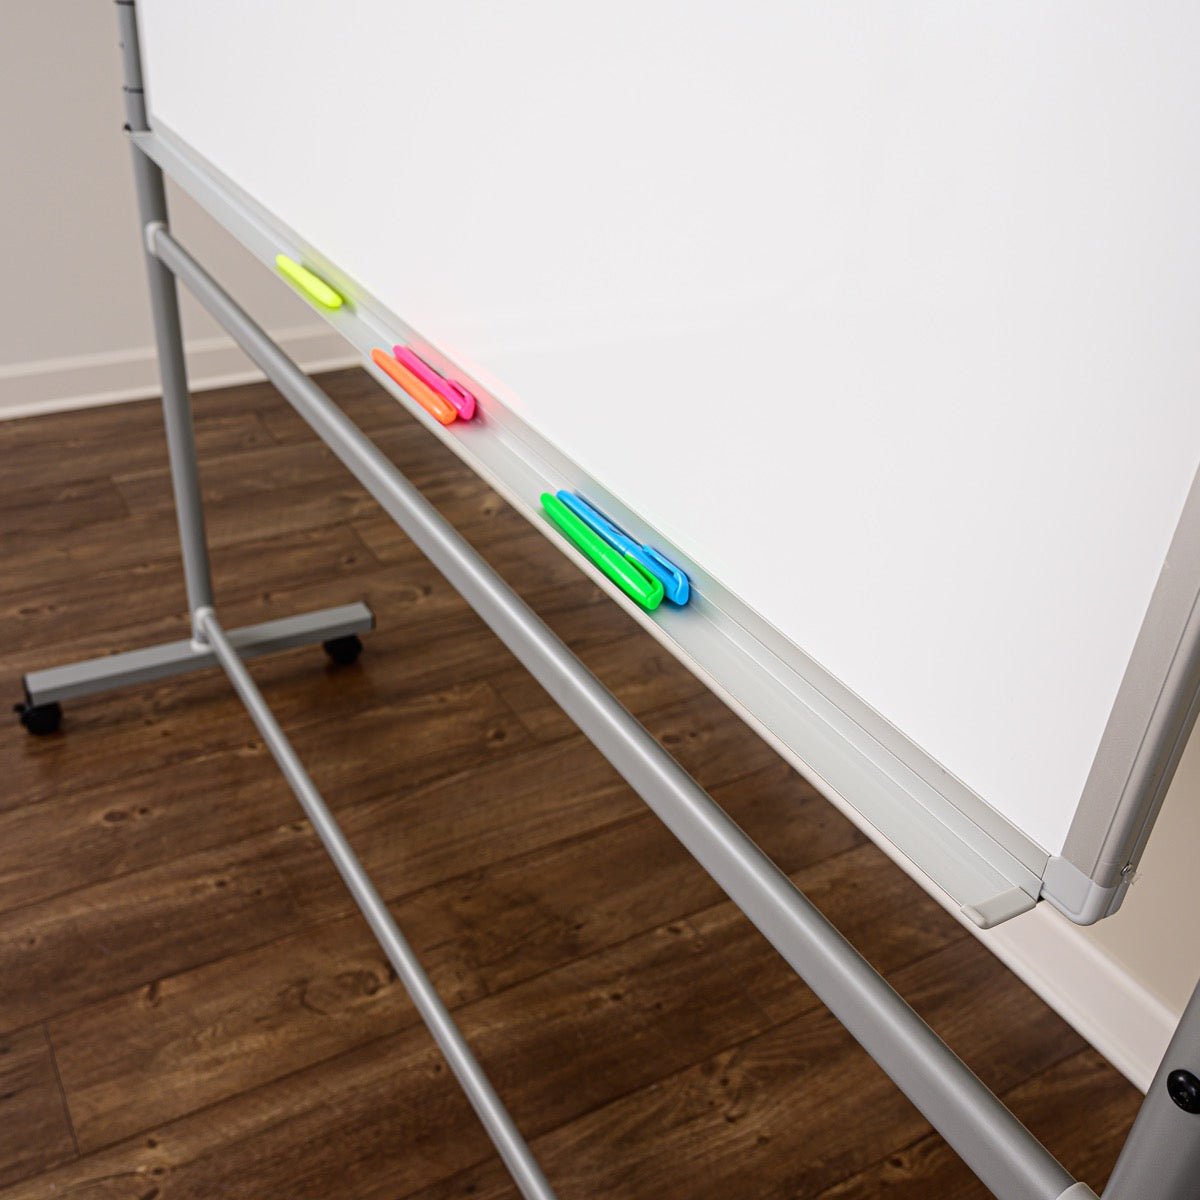 60"W x 40"H Mobile Whiteboard - Double-sided Magnetic dry erase markerboard - Luxor MB6040WW - SchoolOutlet